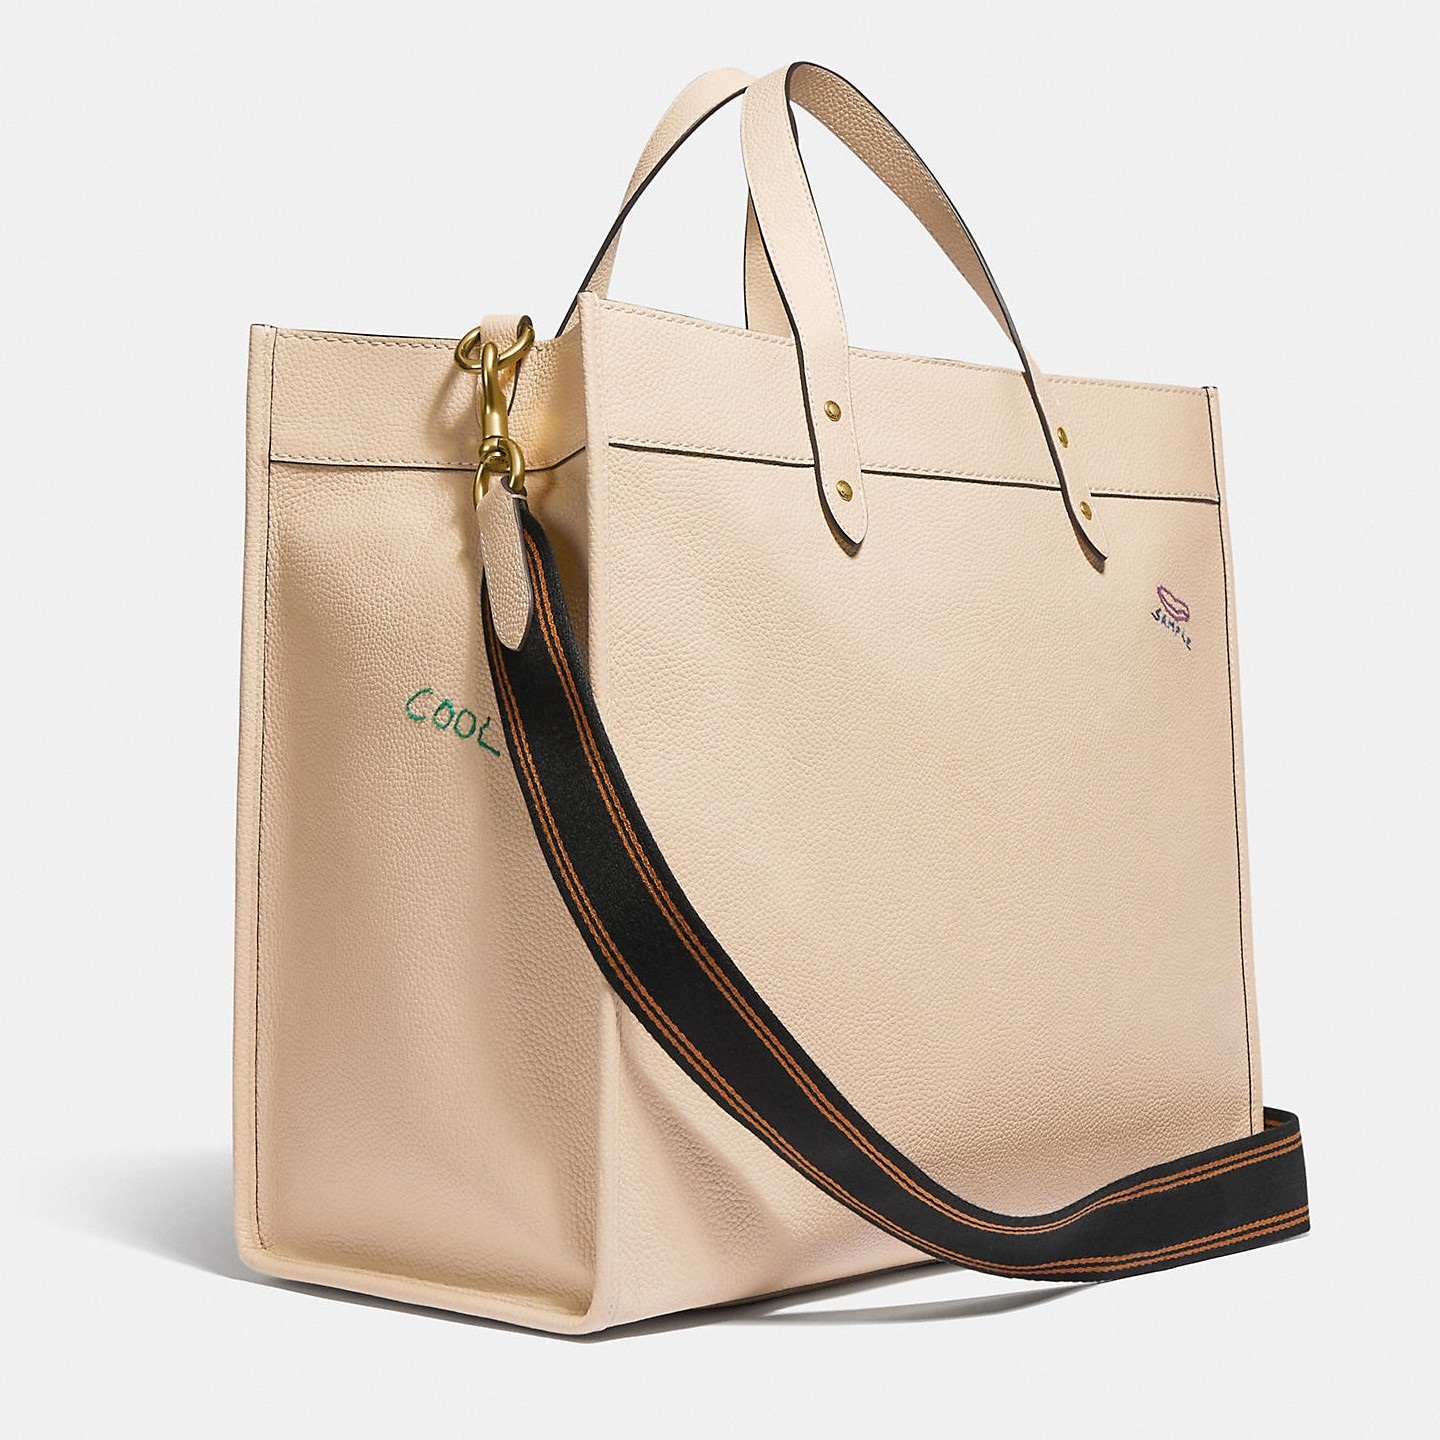 TÚI COACH FIELD TOTE 40 WITH EMBROIDERY IN BRASS 2